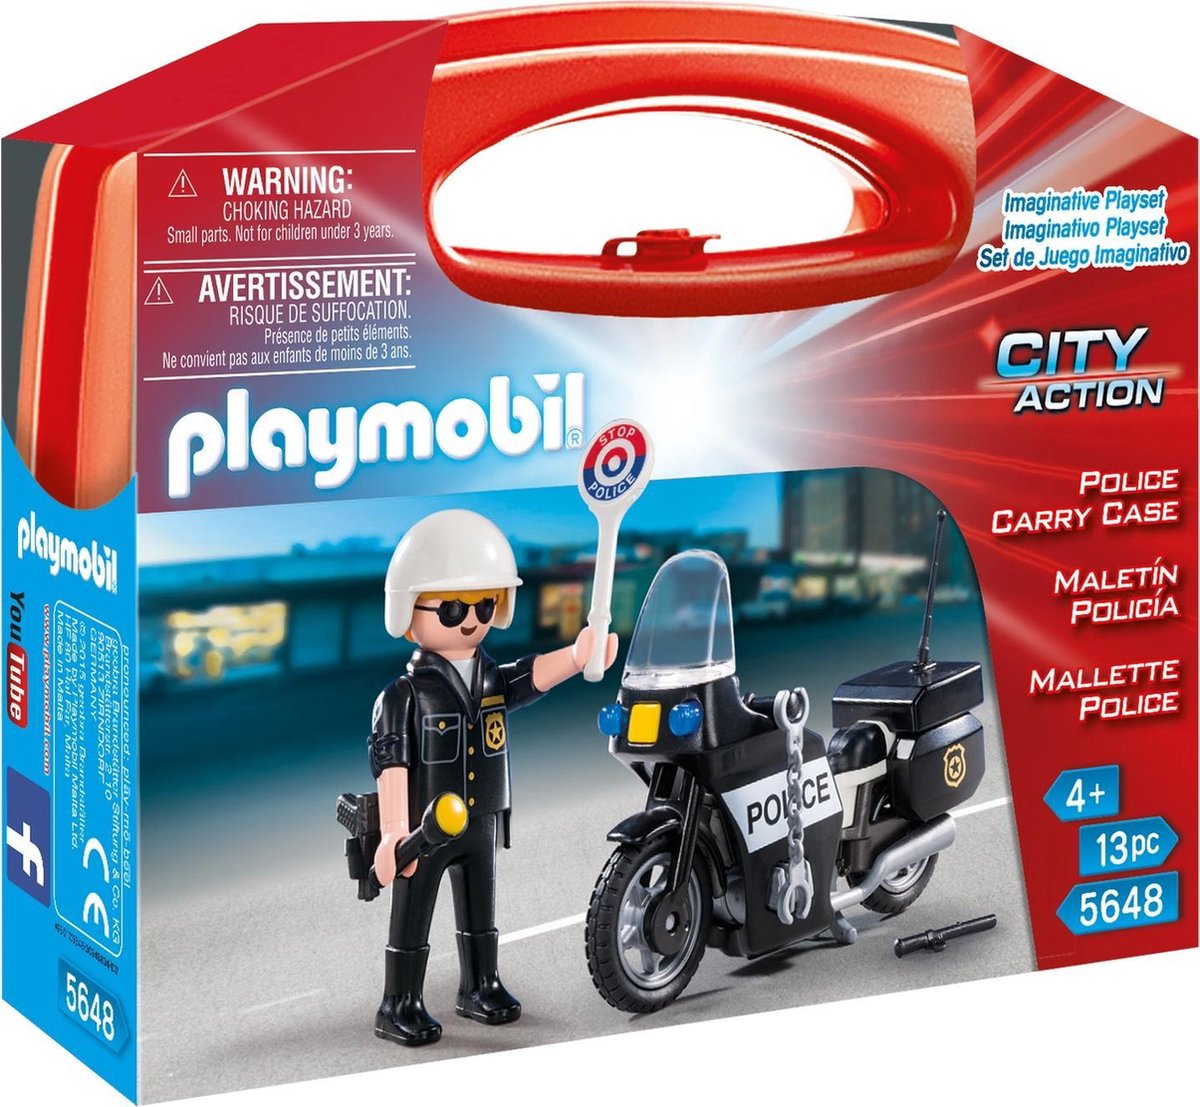 PLAYMOBIL City Action Police Carry Case - 5648